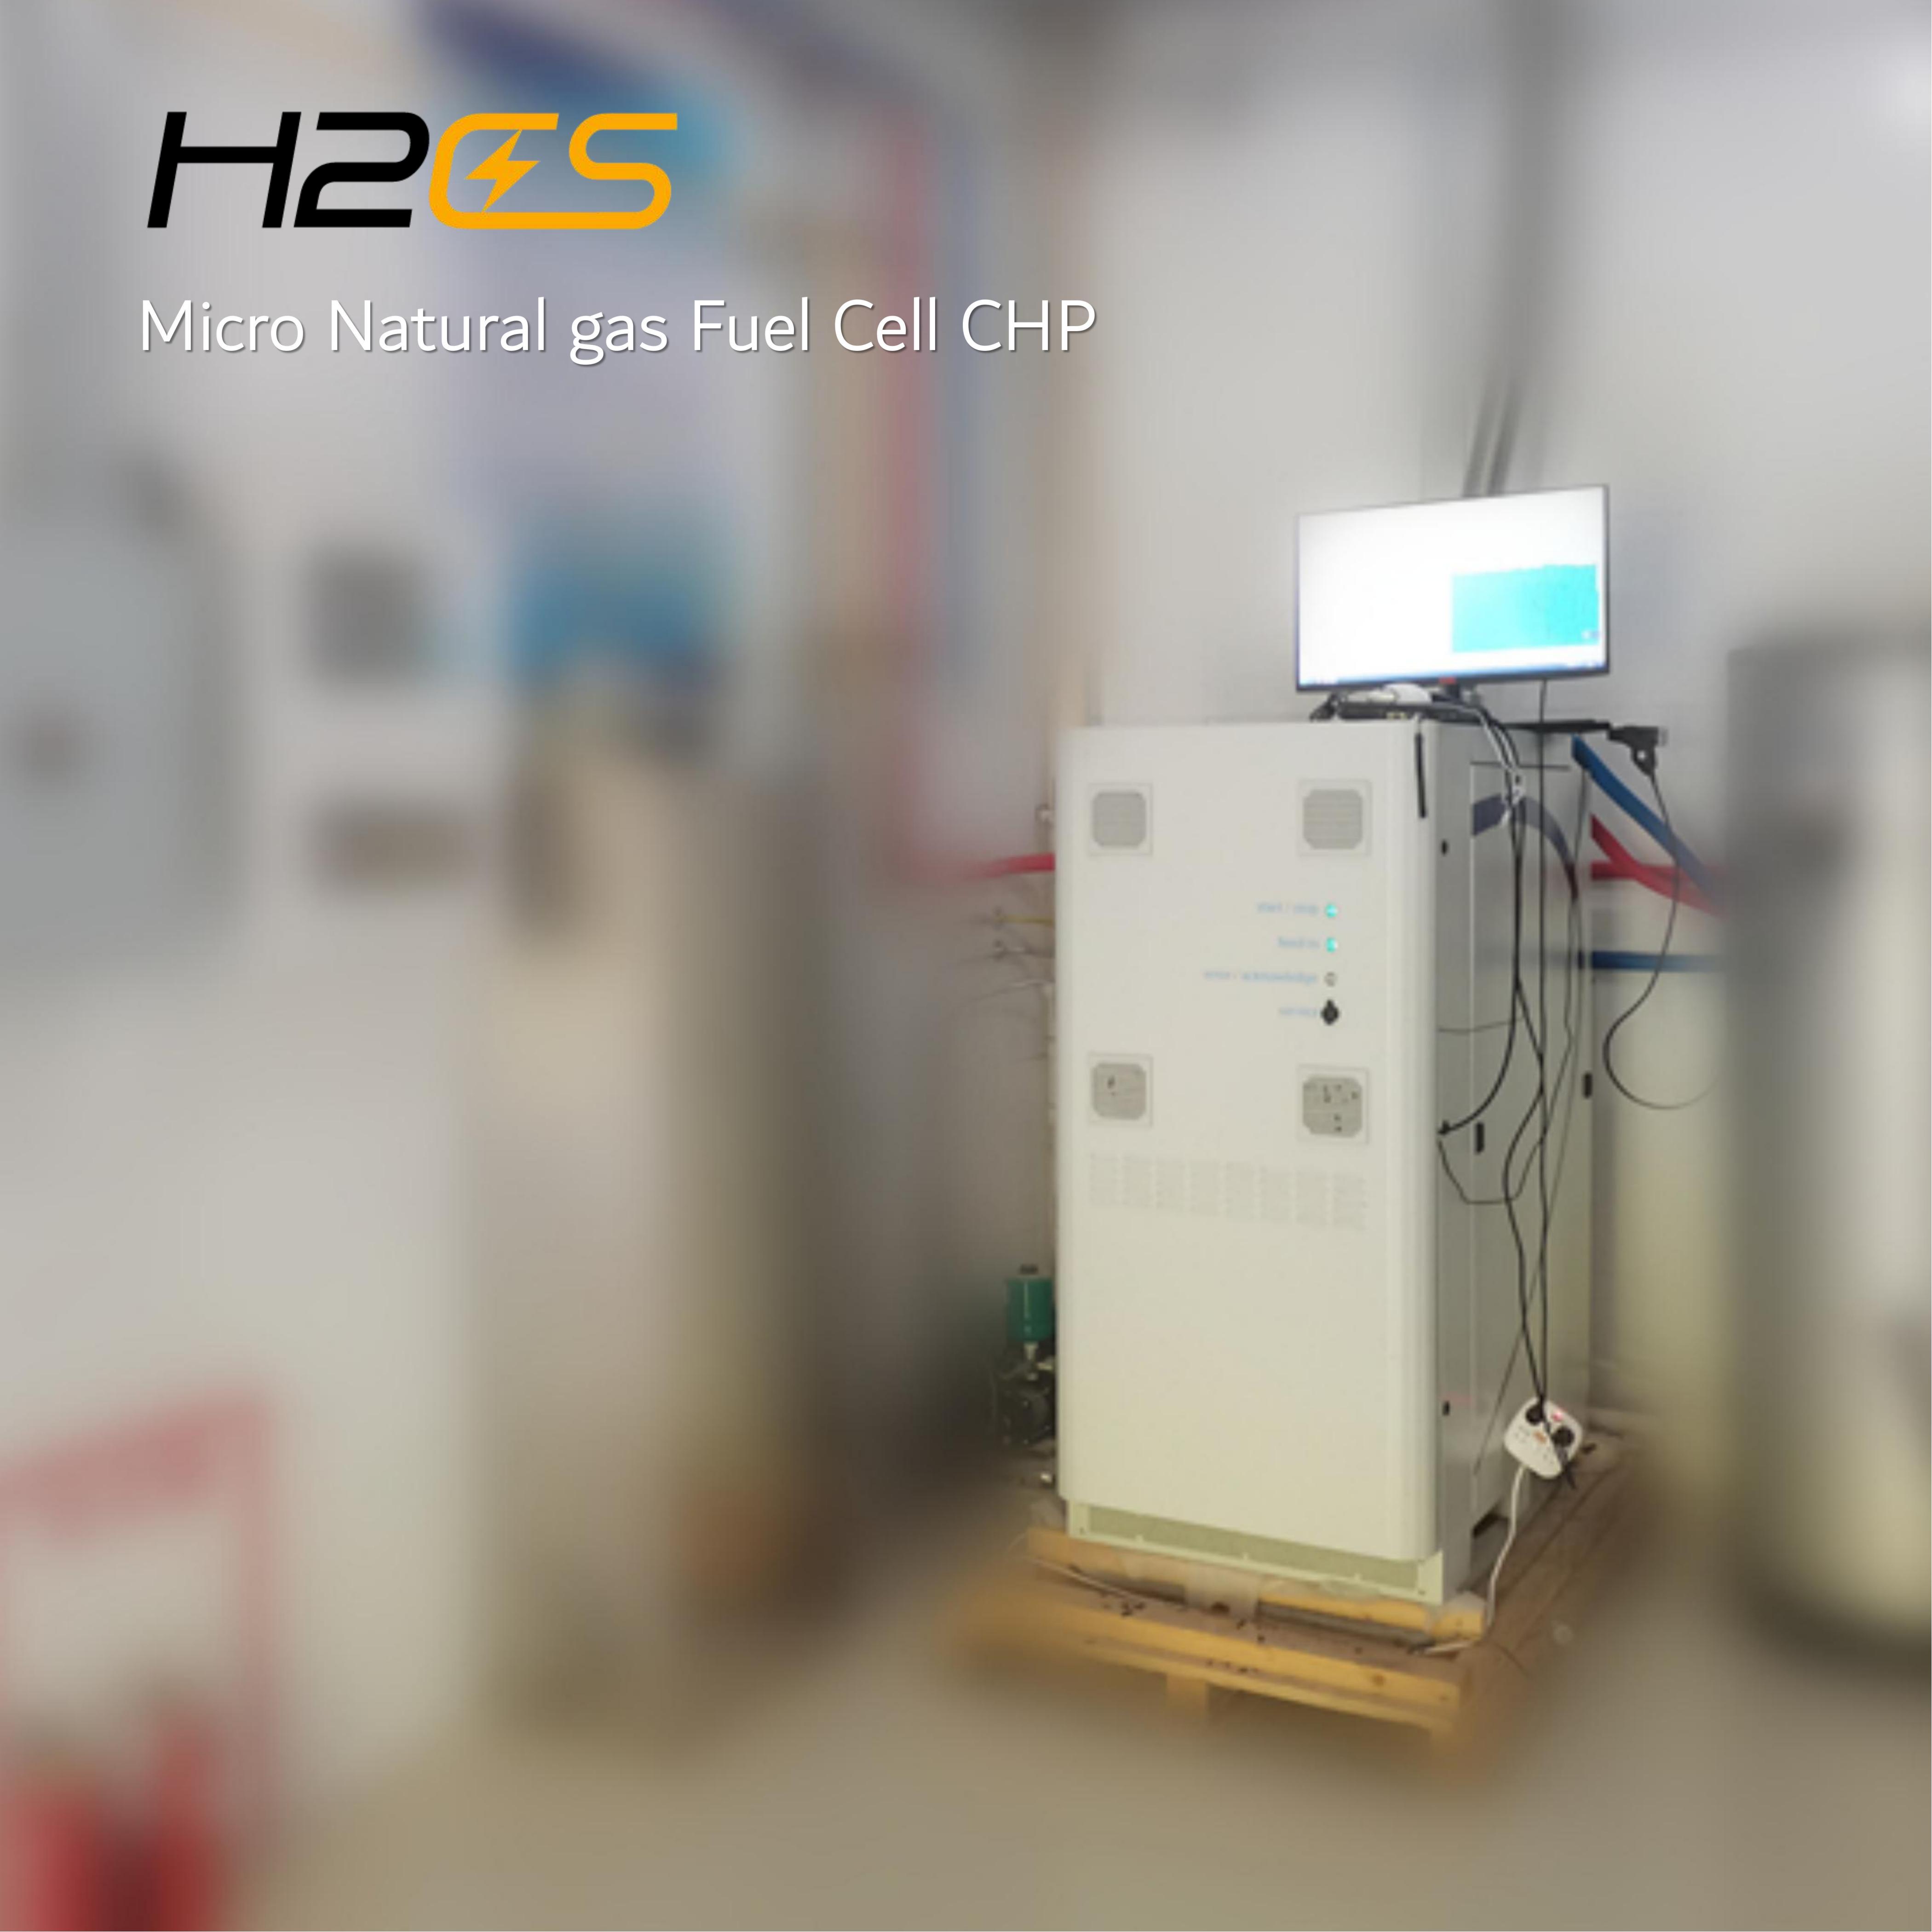 Mini Heat Exchanger Cooling CHP System